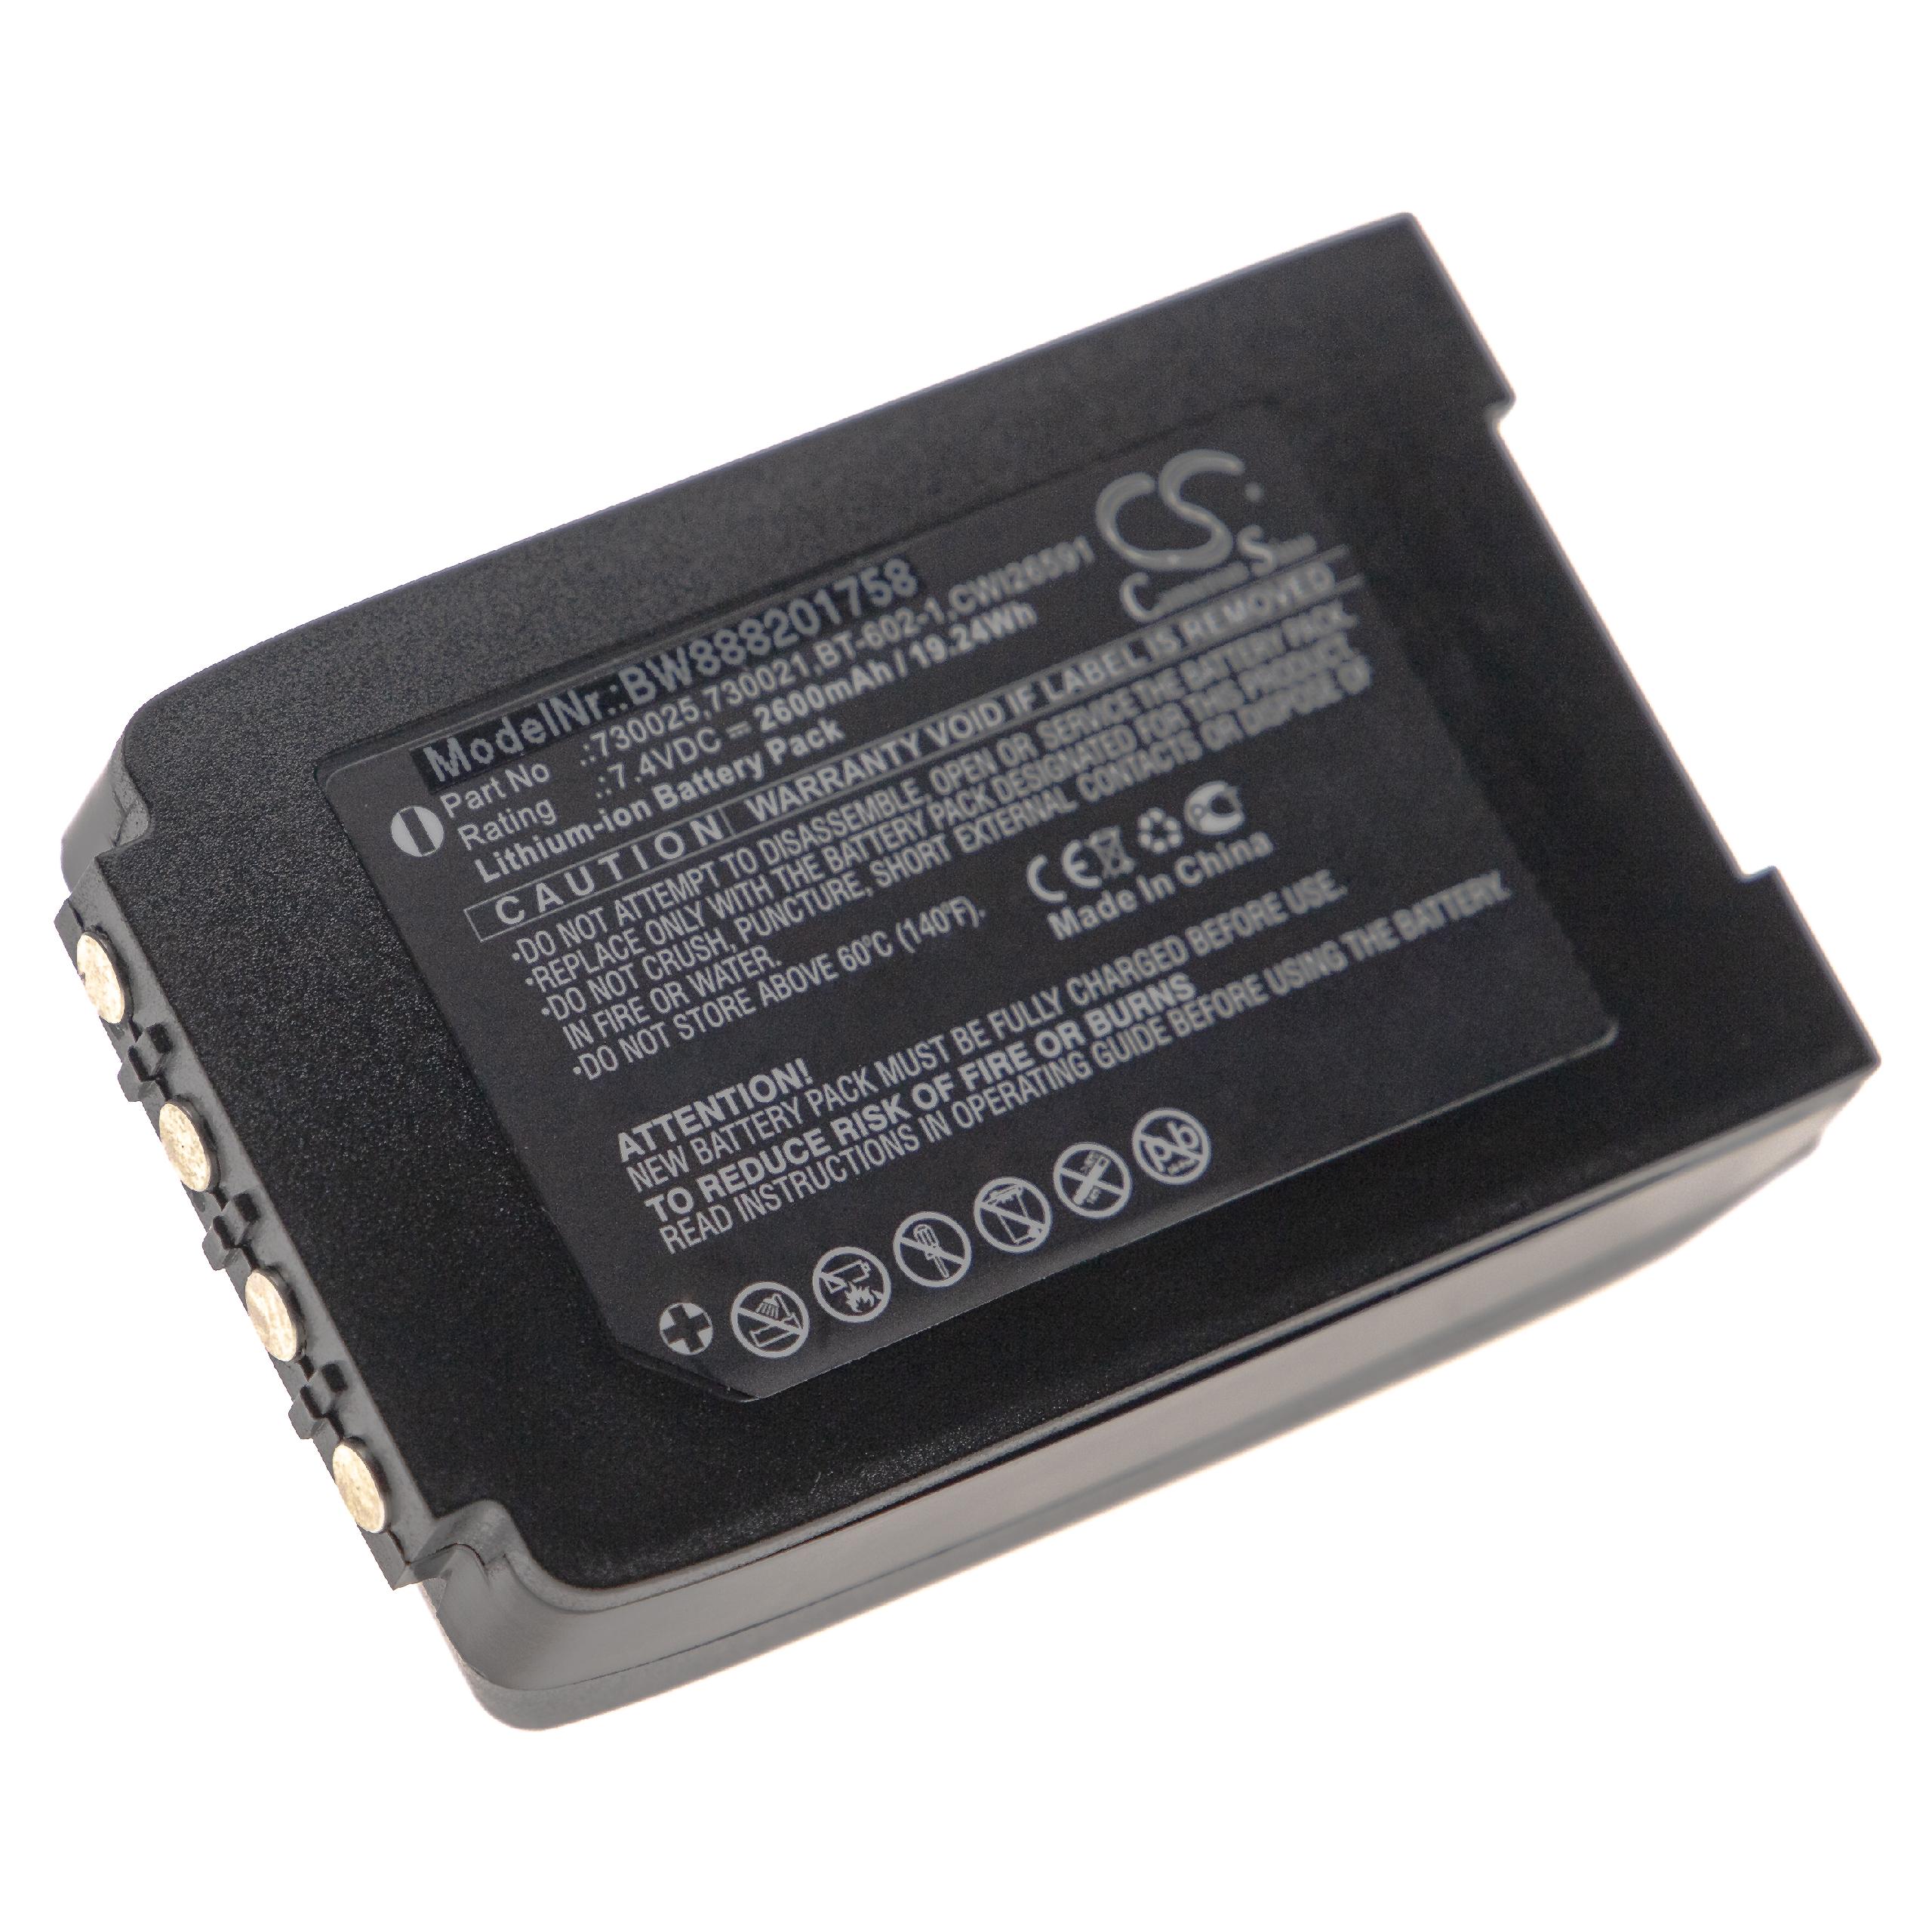 Radio Battery Replacement for VoCollect CWI26591, 730021, 730025, BT-602-1 - 2600mAh 7.4V Li-Ion